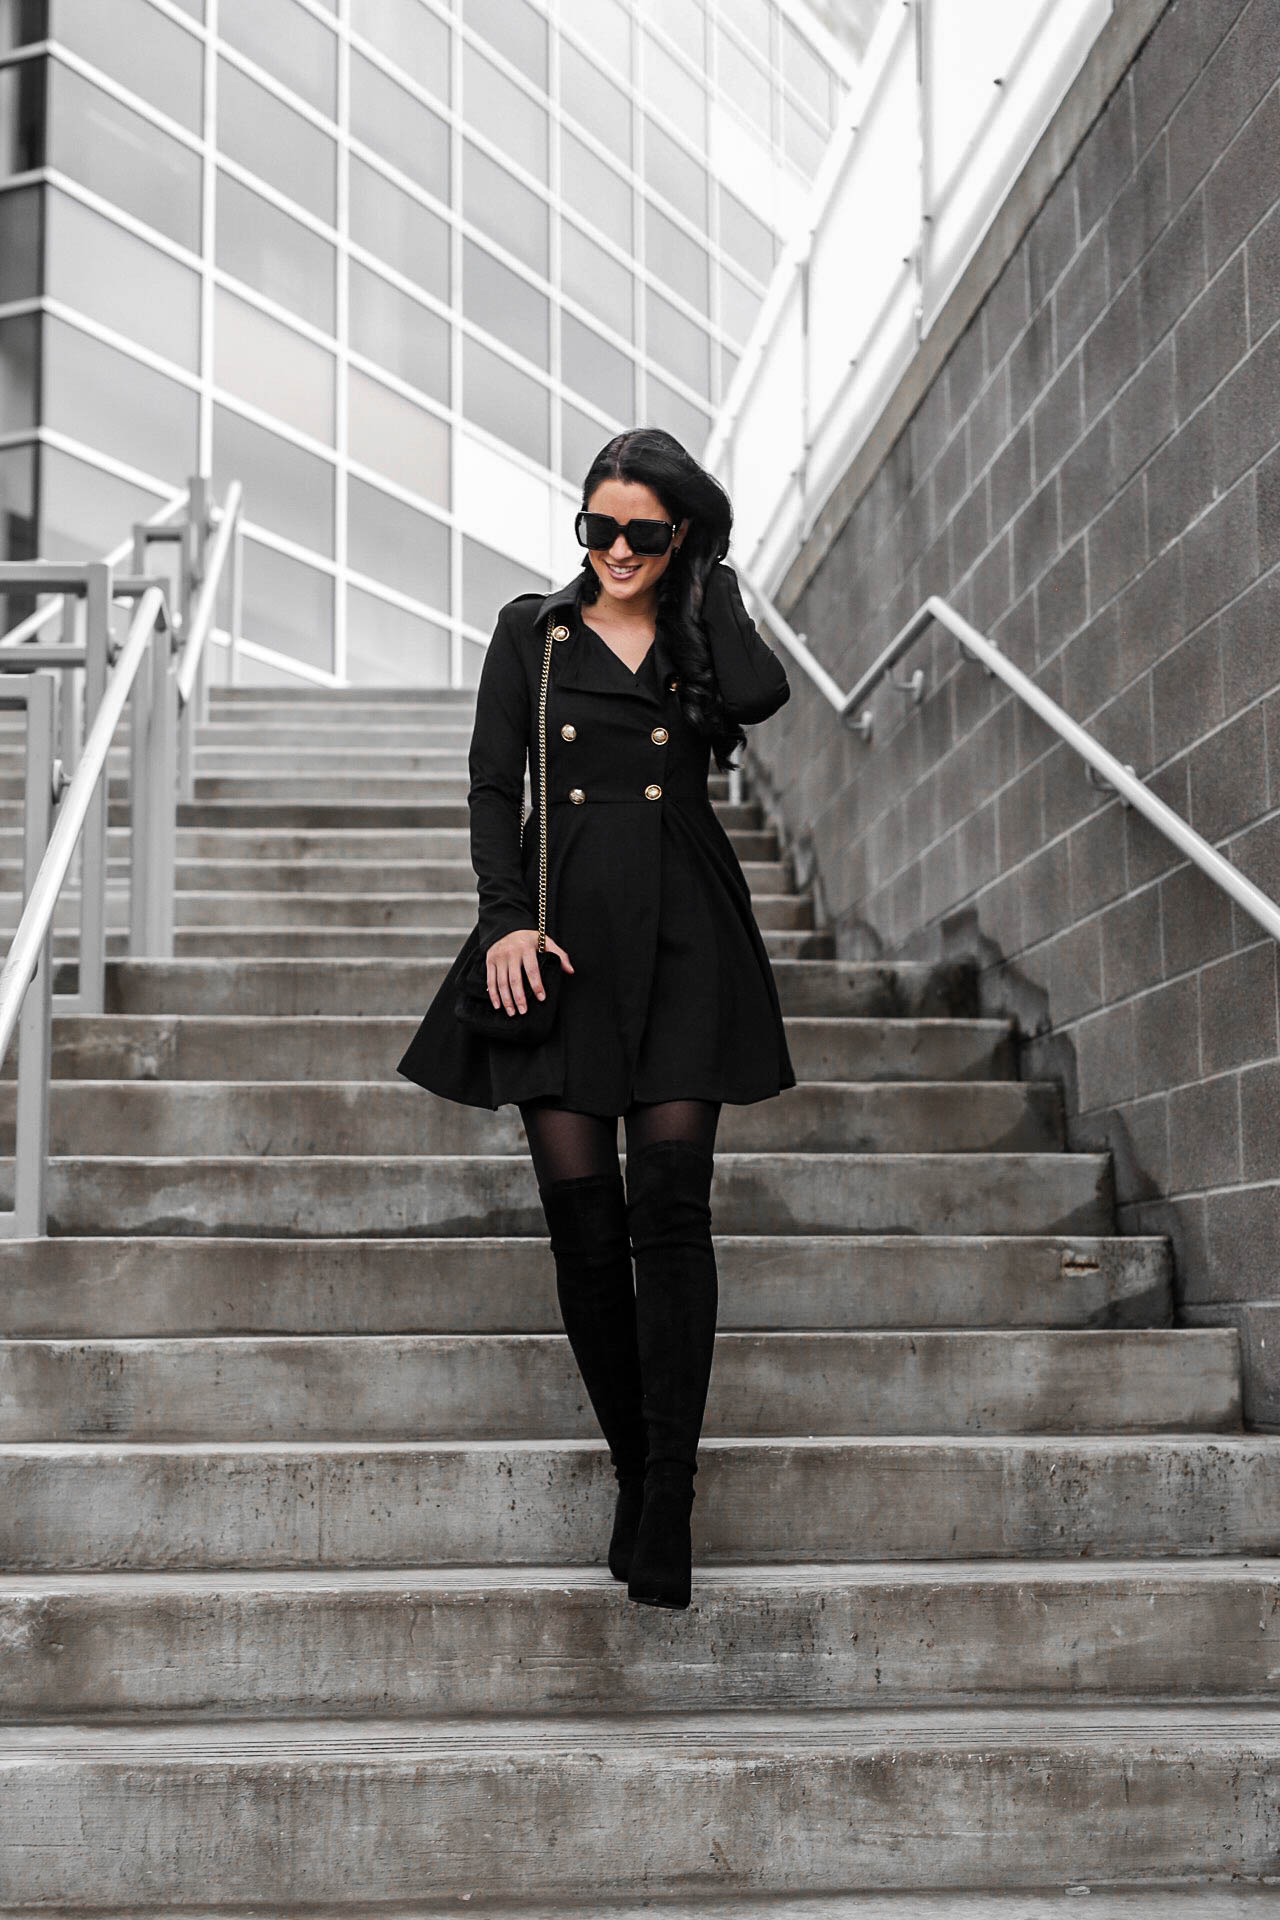 Tips on How to Wear a Black Trench Coat as a Dress | trench coat outfits | trench coats for women | how to style a trench coat | dresses for winter | winter fashion tips | winter style ideas || Dressed to Kill #trenchcoat #winterdresses #winterfashion - How to Wear a Trench Coat Dress by popular Austin fashion blogger Dressed to Kill